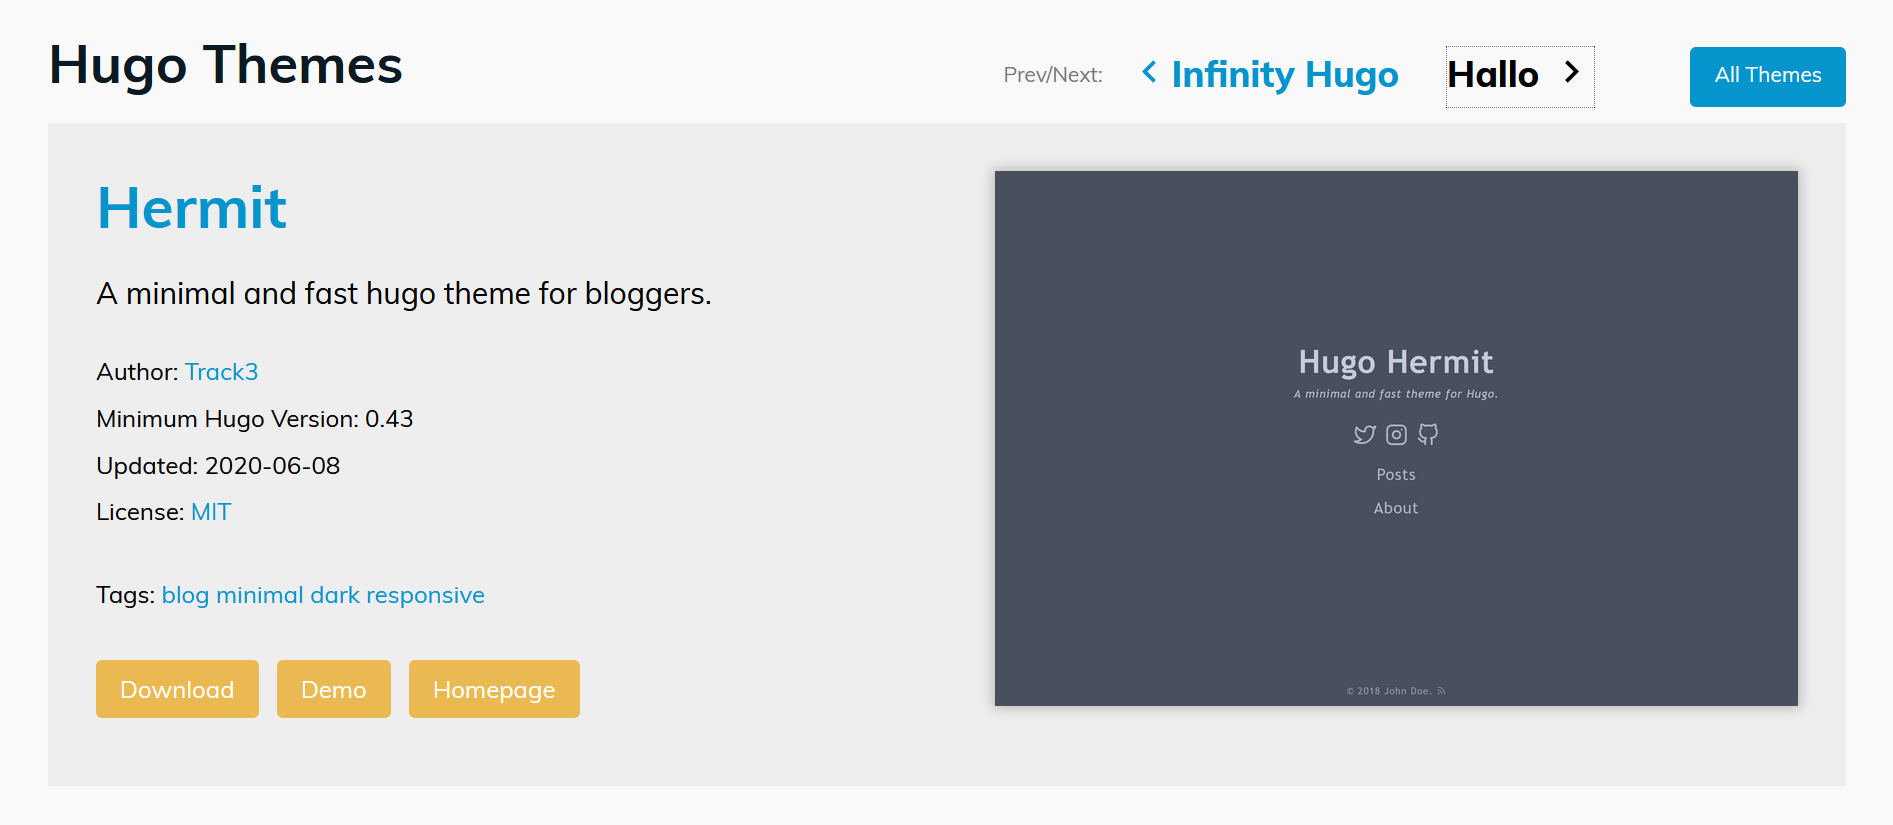 Specifically, this site uses the Hermit Hugo theme